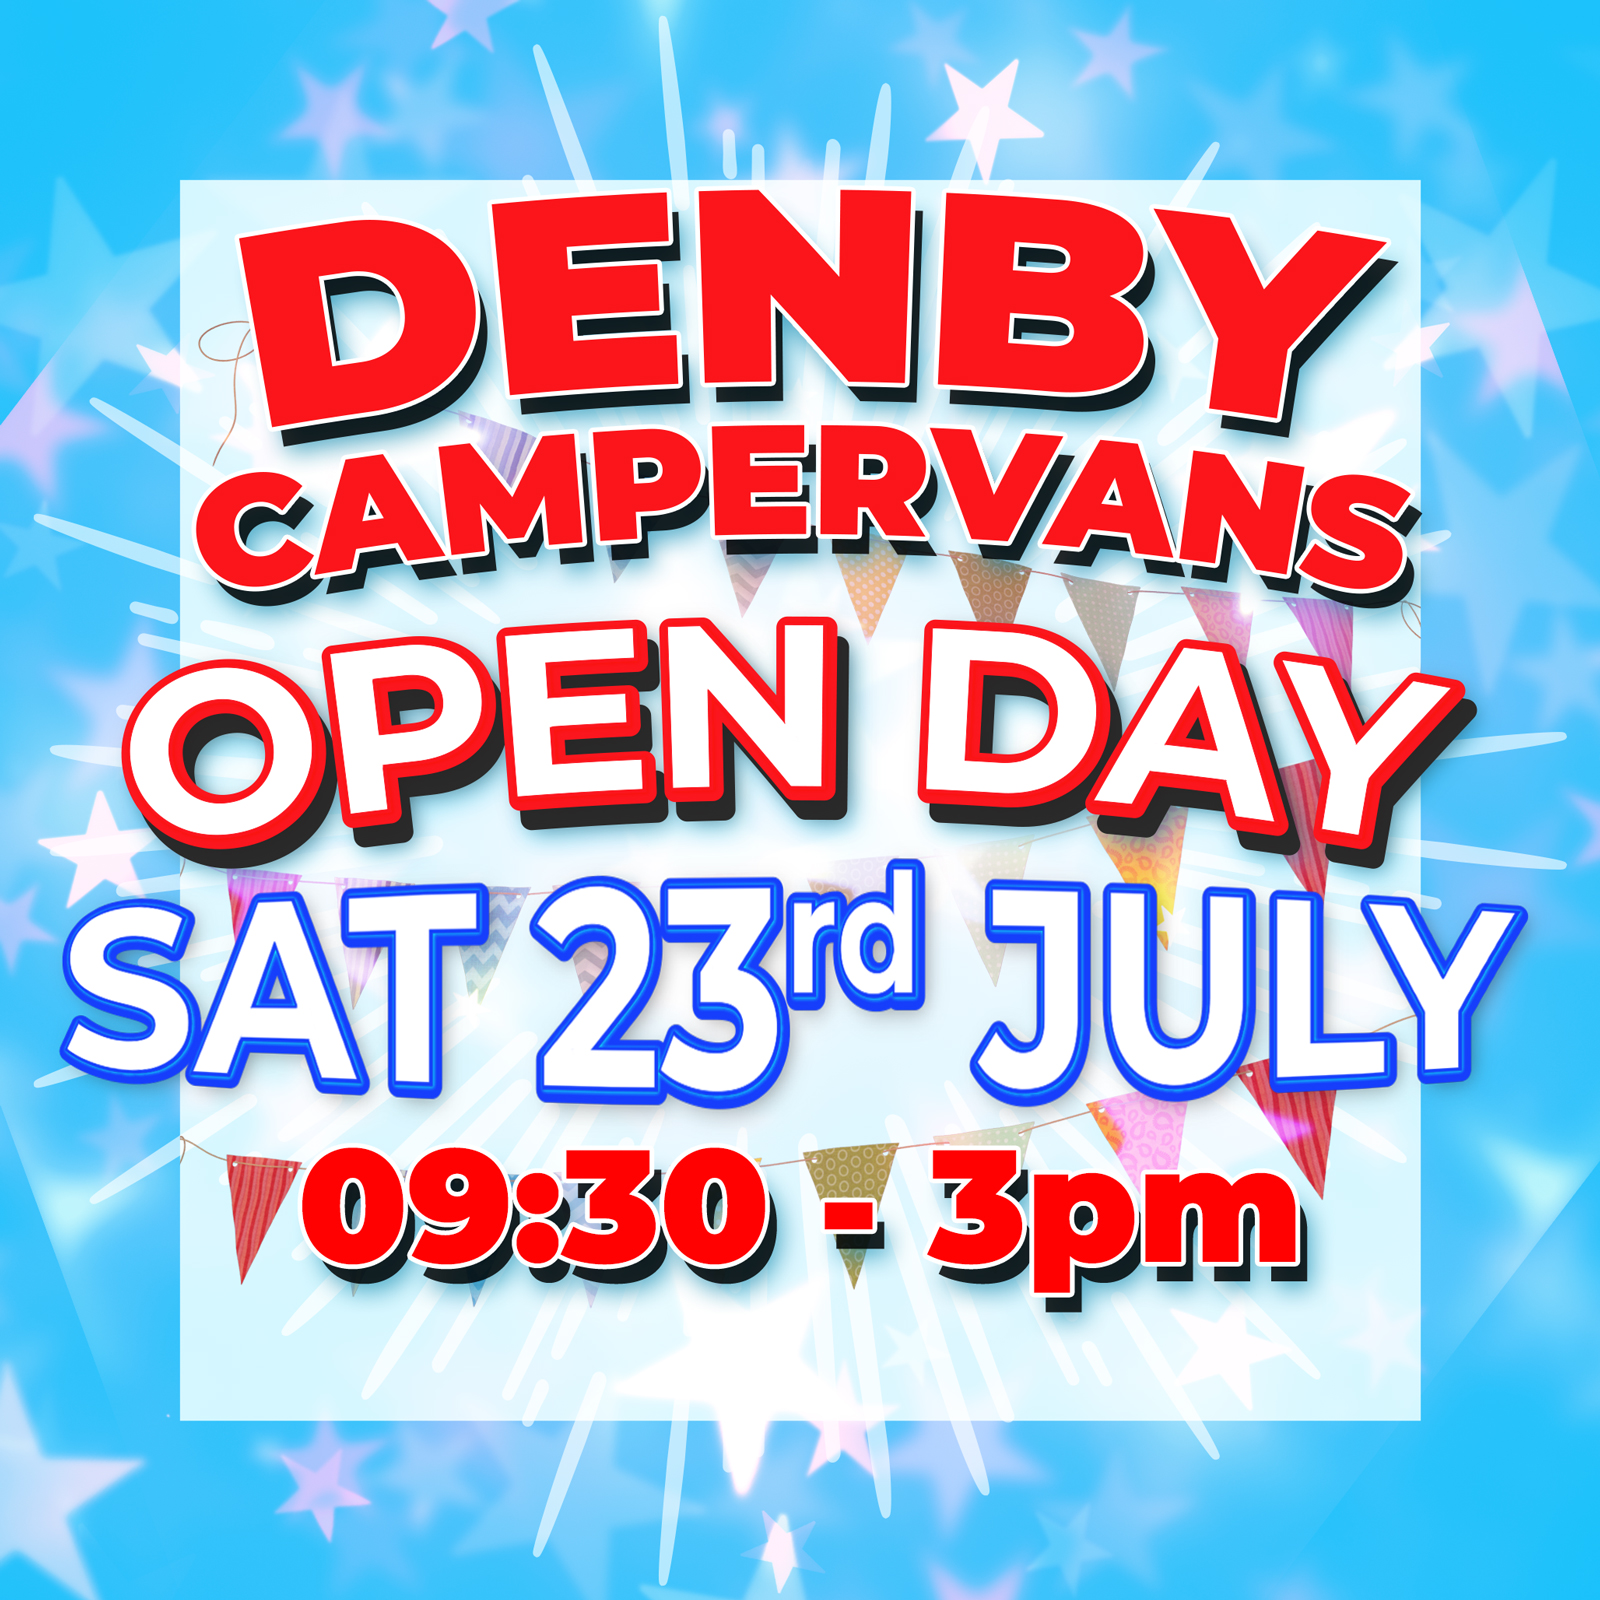 Open Day – 23rd July 9:30 – 3pm